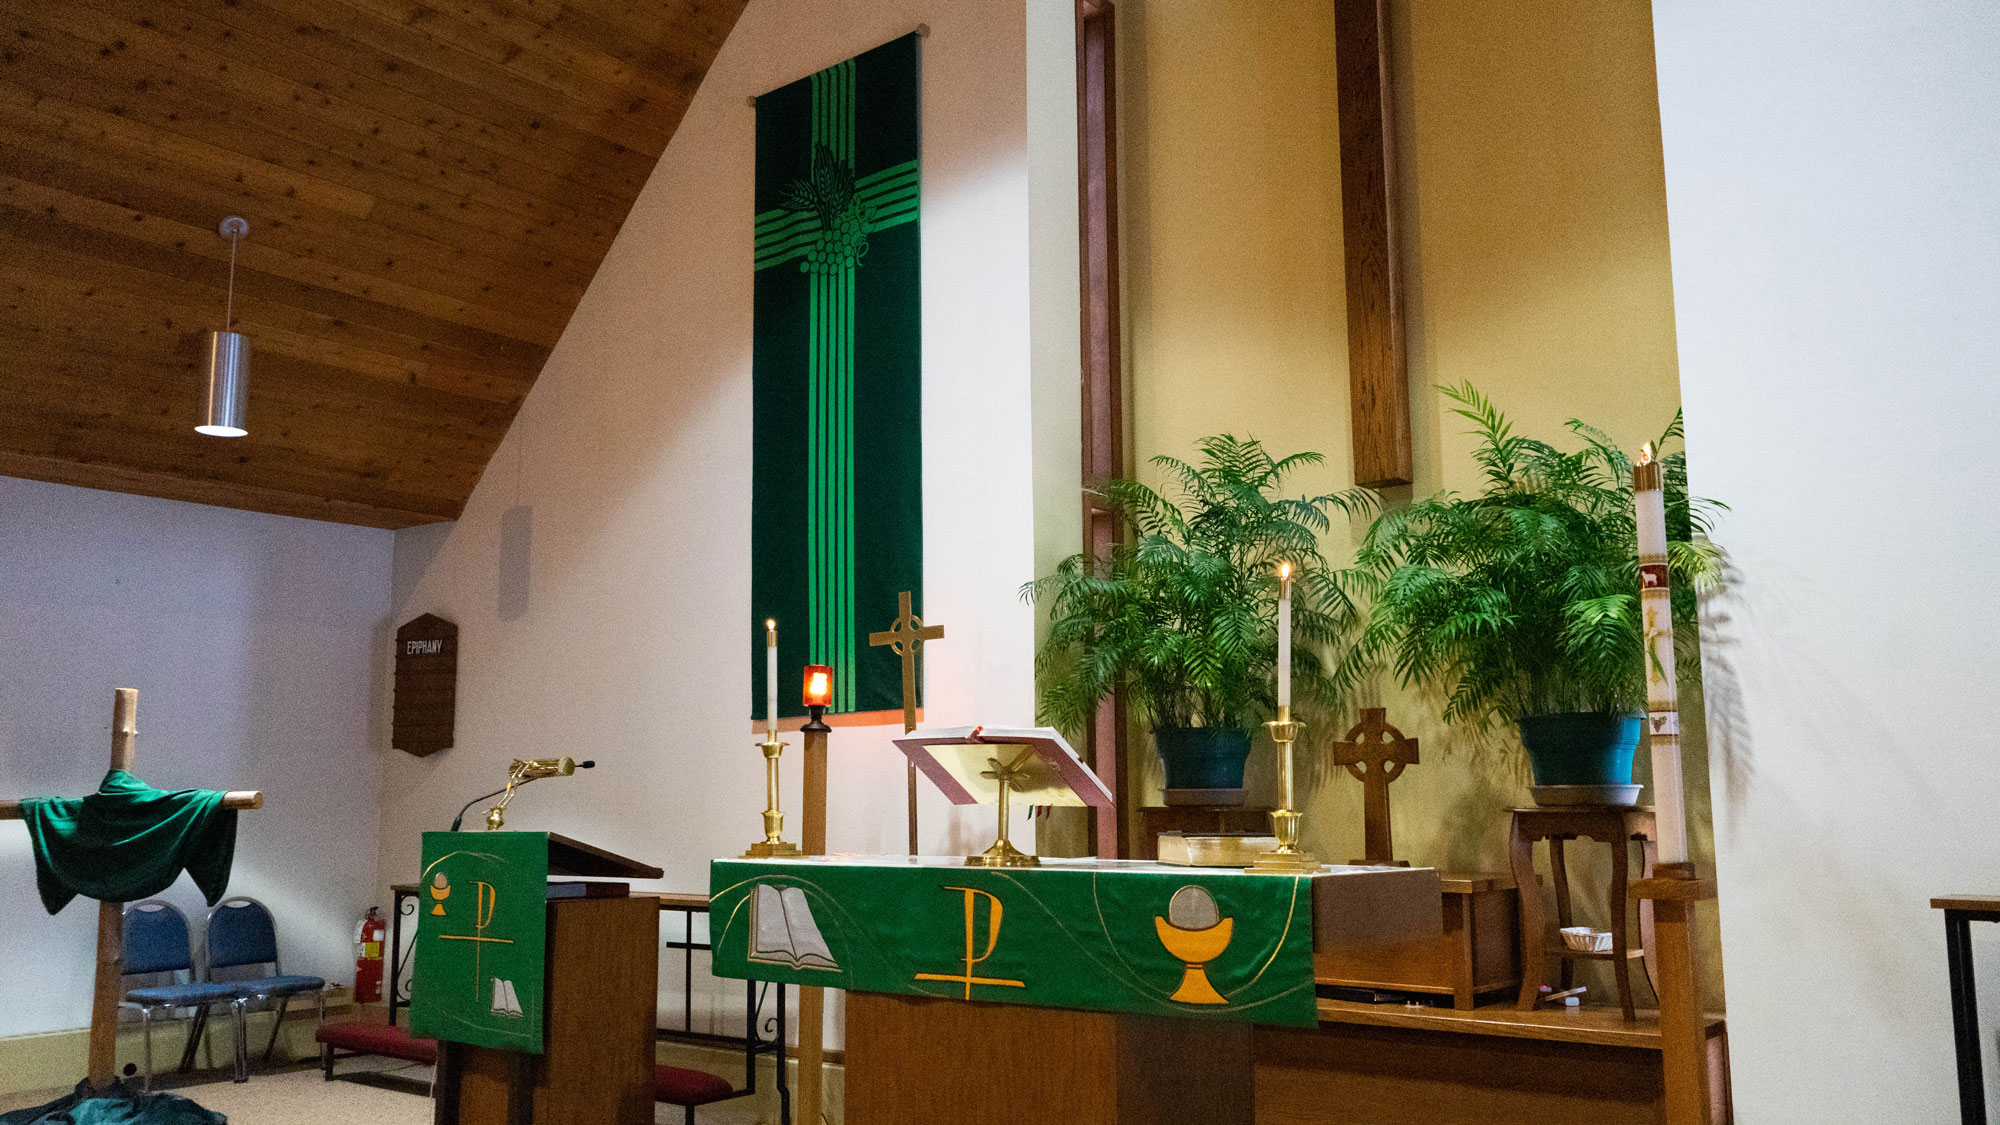 The view of the Altar at Bethesda Lutheran with emerald green linens.